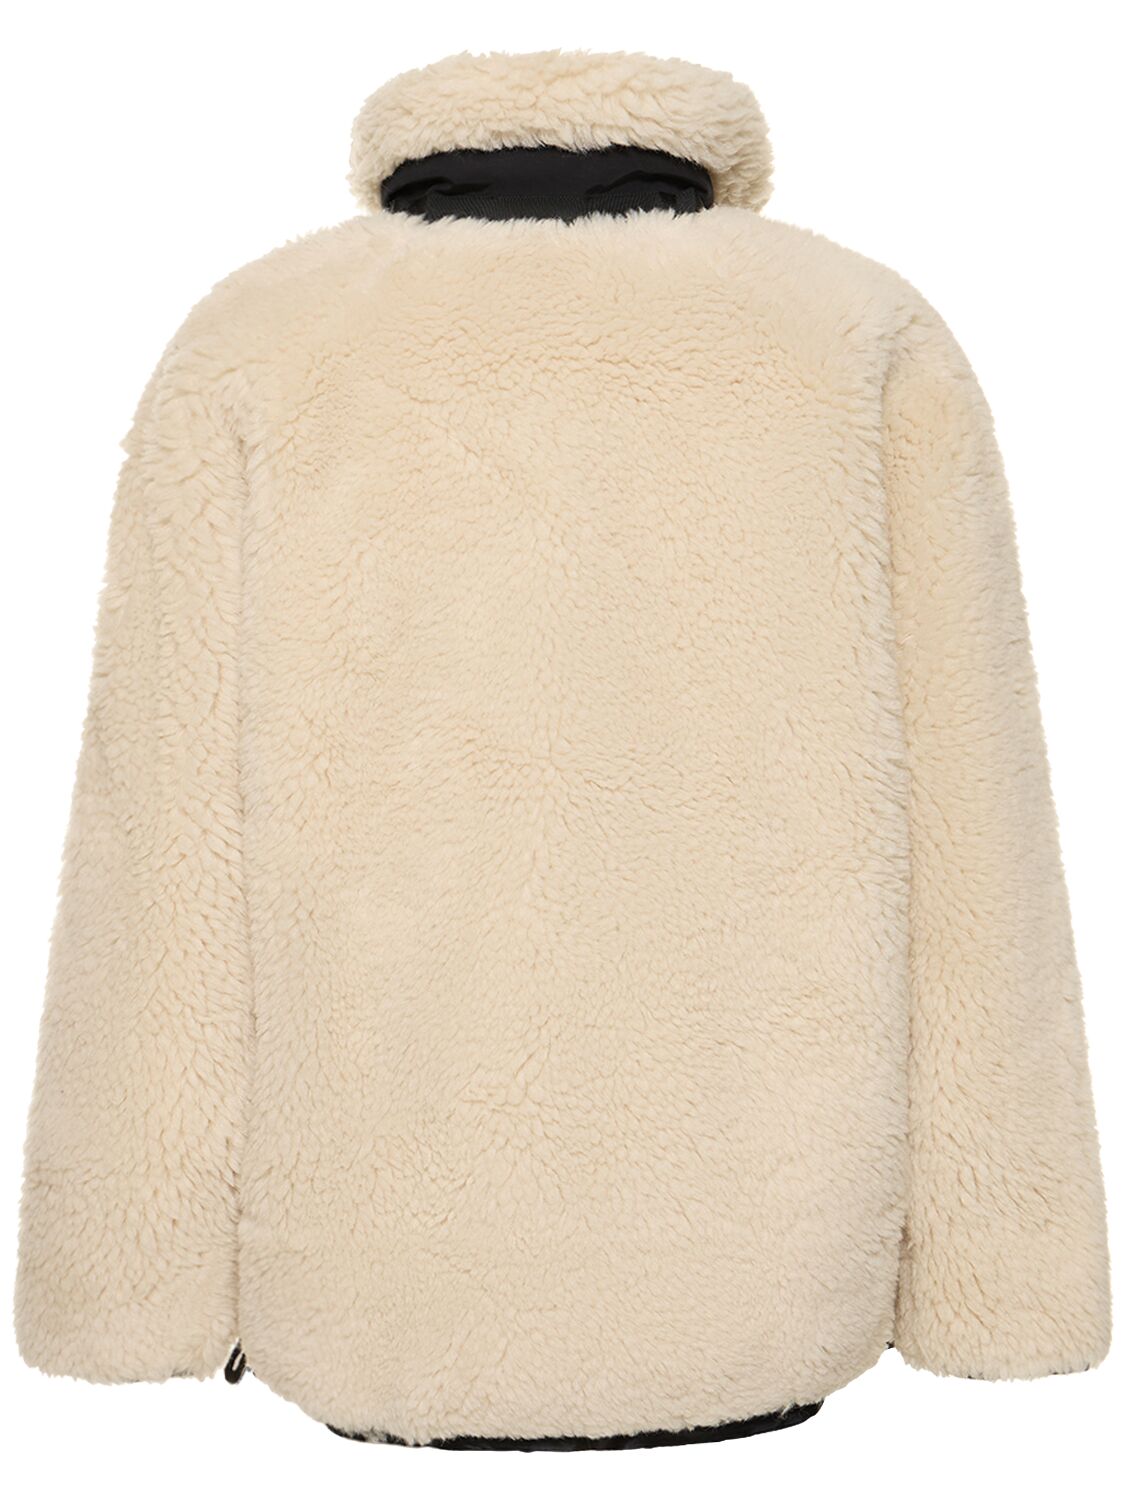 Women's Convertible Jacket In Ripstop And Faux Shearling by Sacai